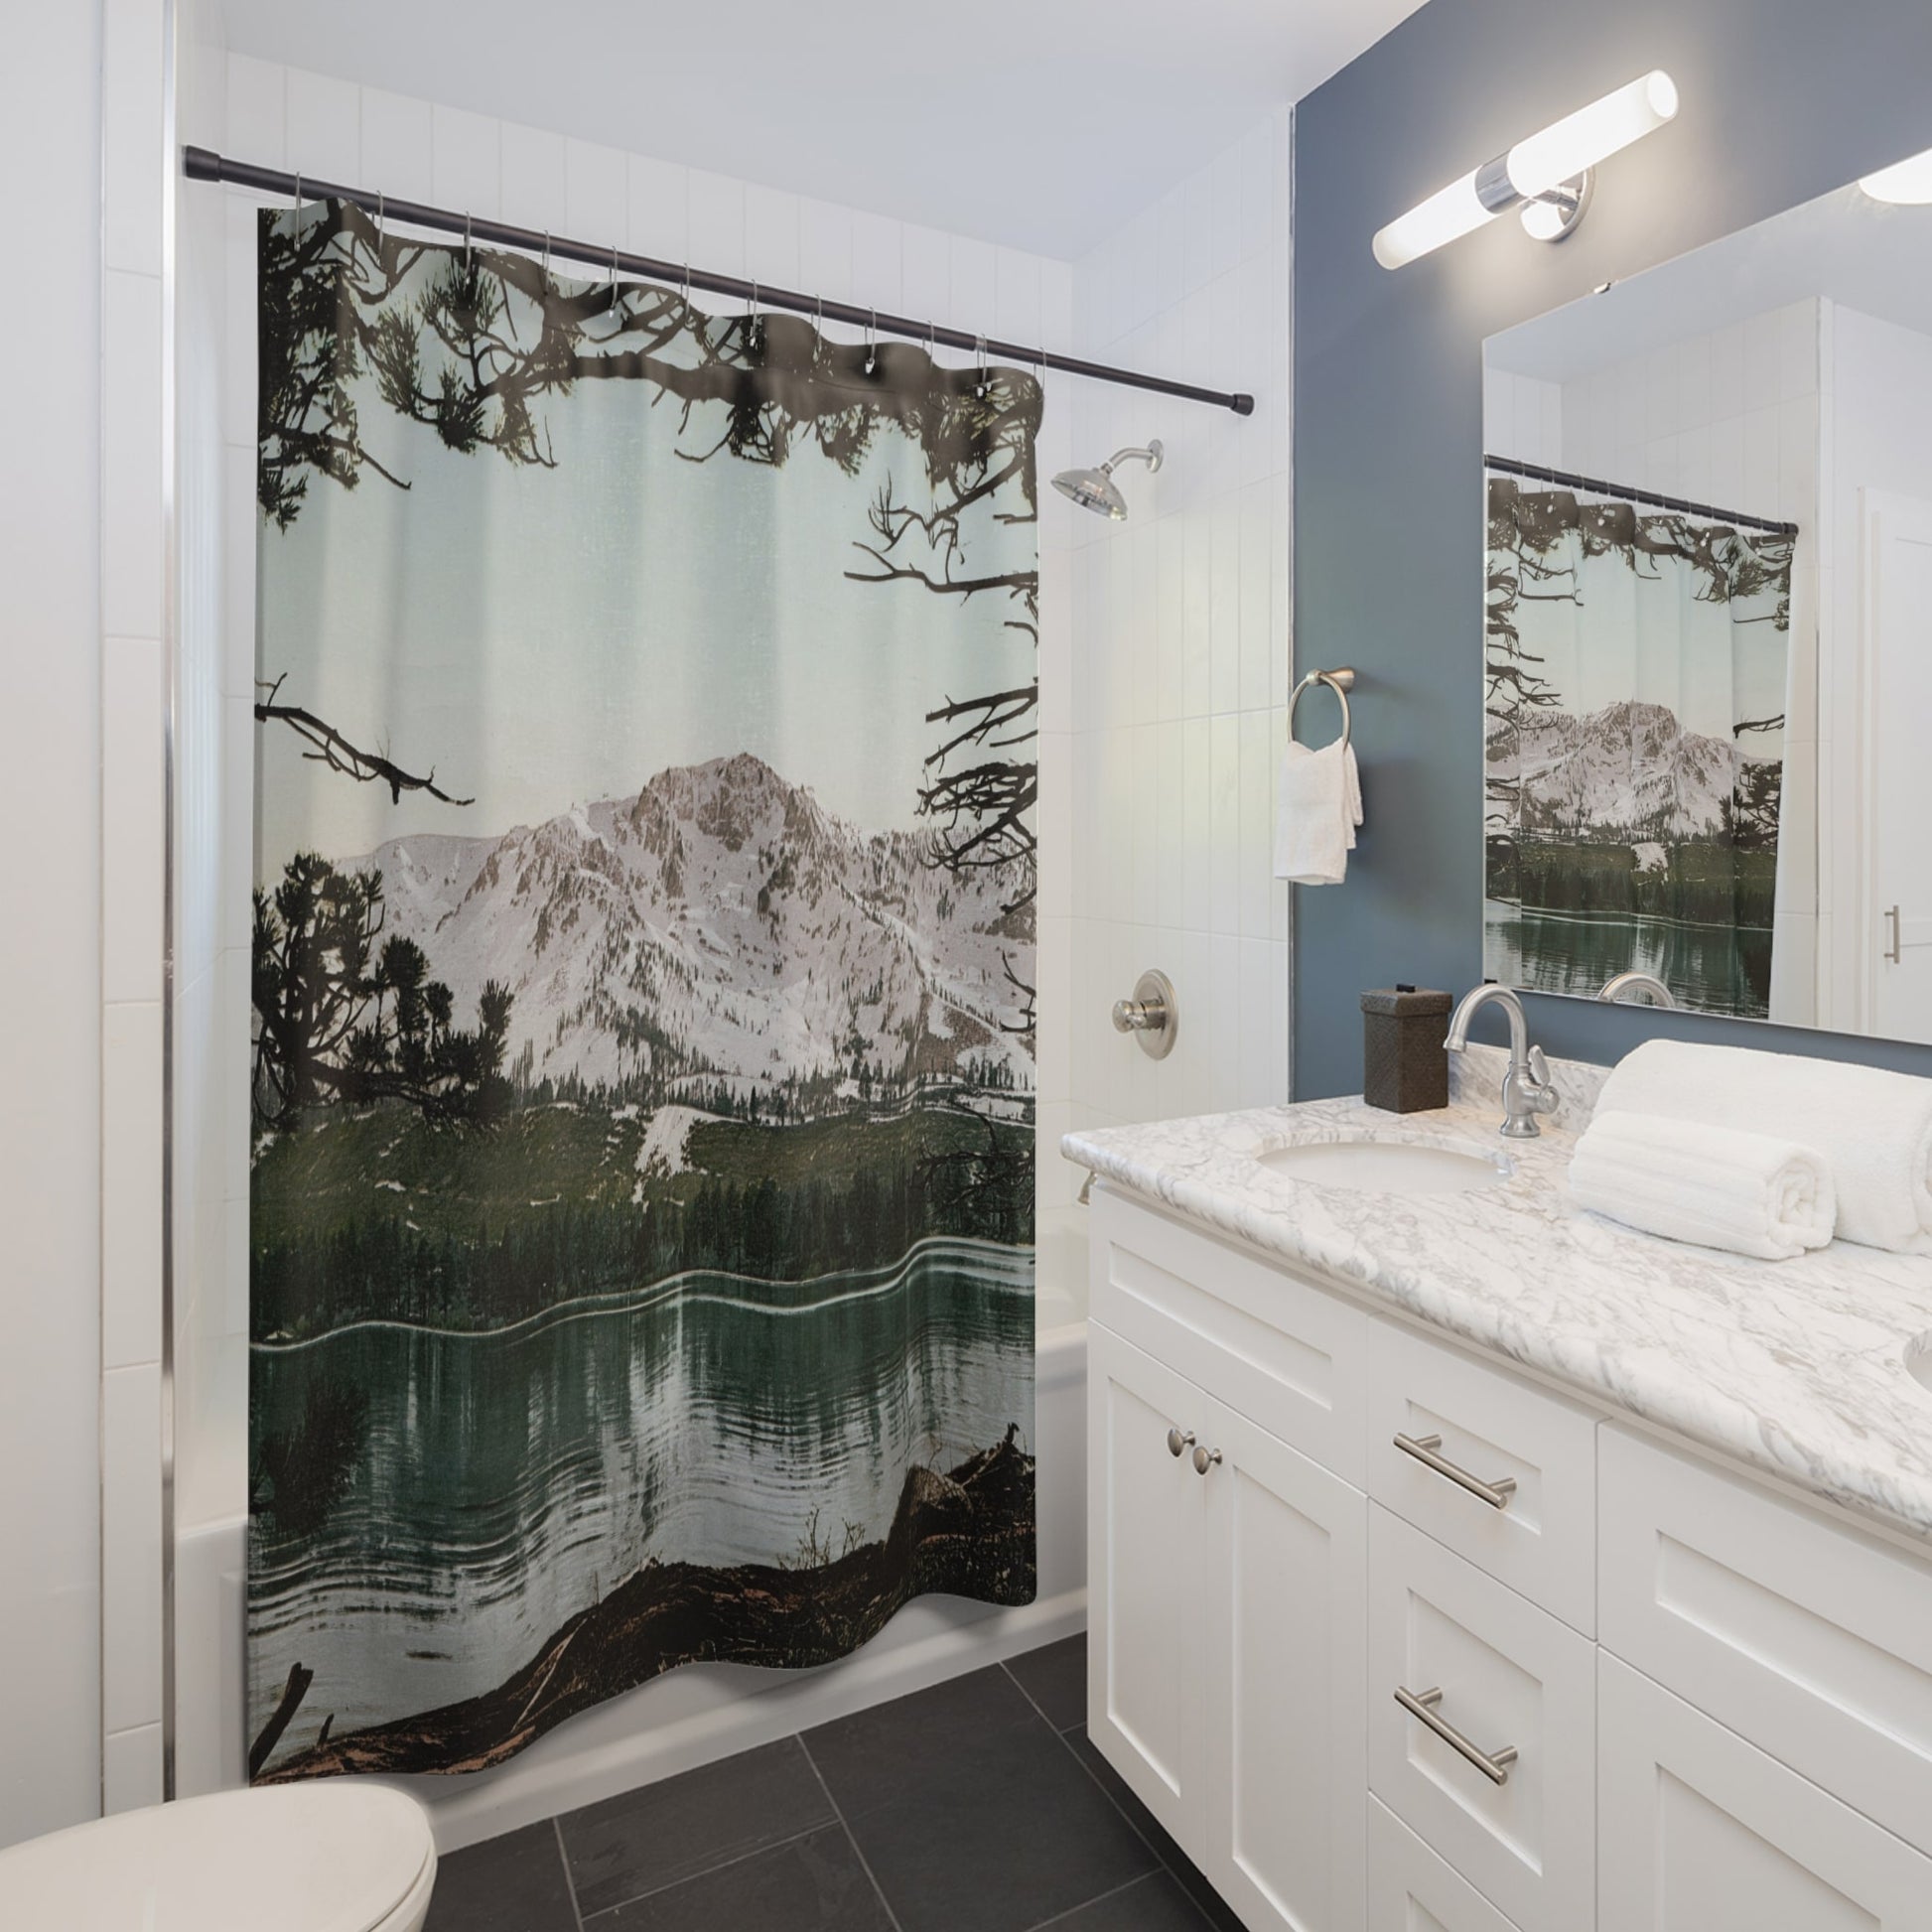 Snowy Mountains Shower Curtain Best Bathroom Decorating Ideas for Landscapes Decor